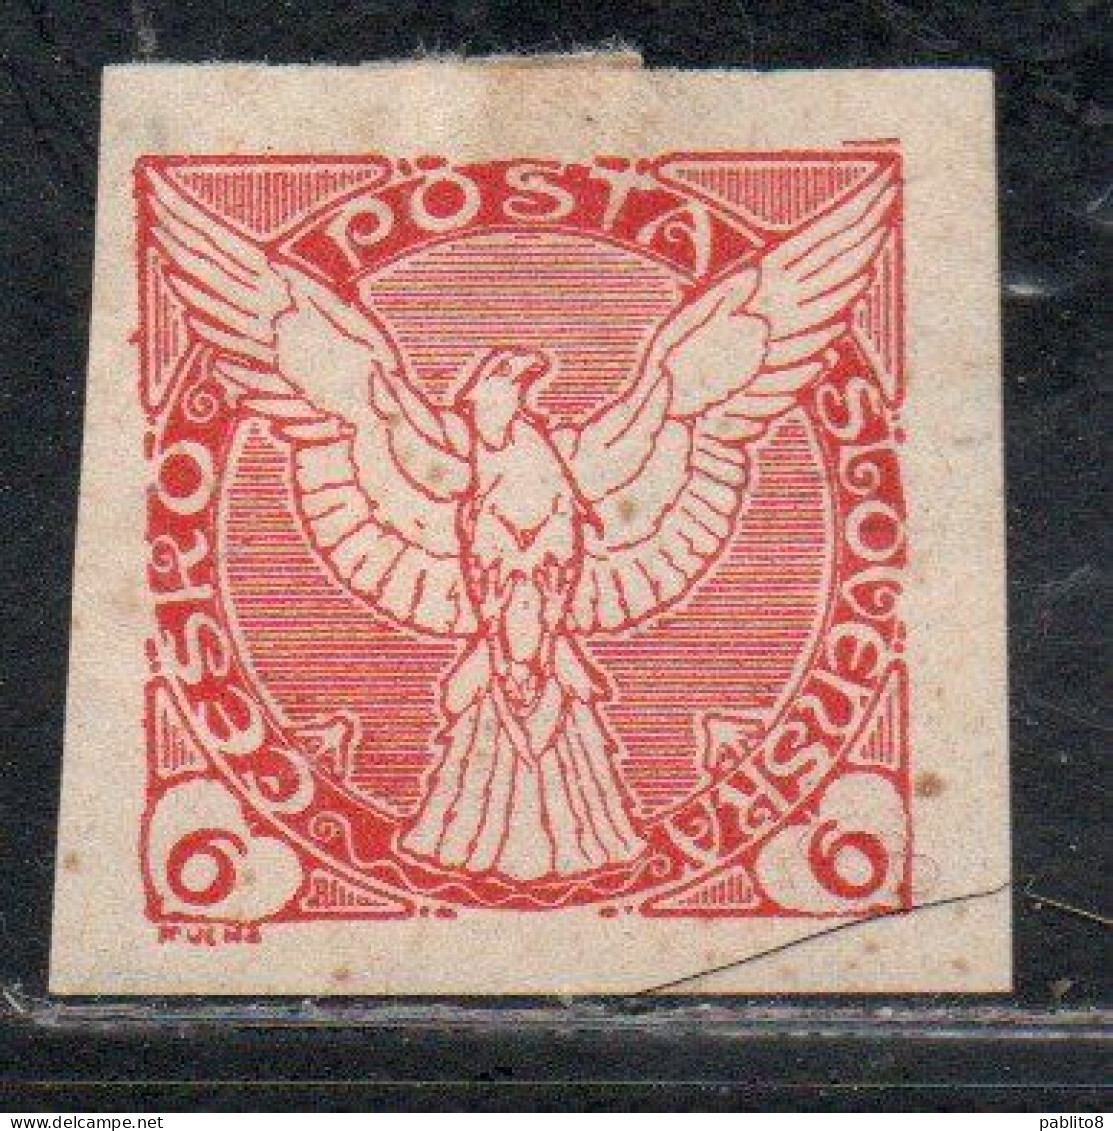 CZECHOSLOVAKIA CESKA CECOSLOVACCHIA 1918 1920 IMPERF. NEWSPAPER STAMPS WINDHOVER 6h MH - Newspaper Stamps